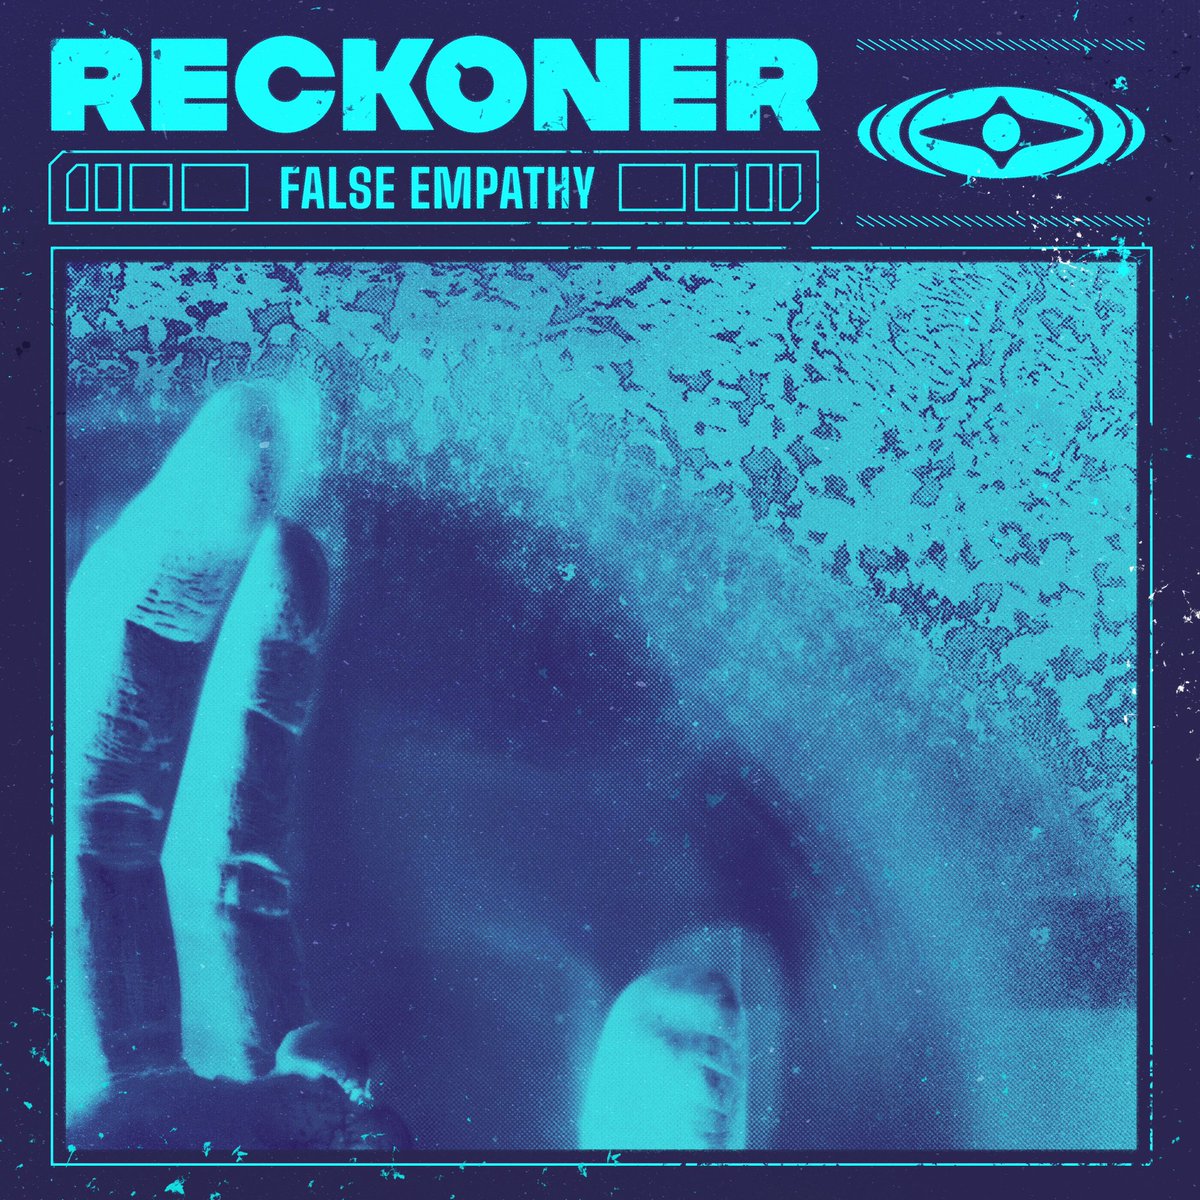 The pre-save for False Empathy is available today! Click our link in bio, available on all digital streaming services.

Here is the artwork, designed by the mega talent that is Stuart Horwood 

#reckoner #reckonercult #falseempathy #altmusic #newmusic #singleartwork #posthardcore